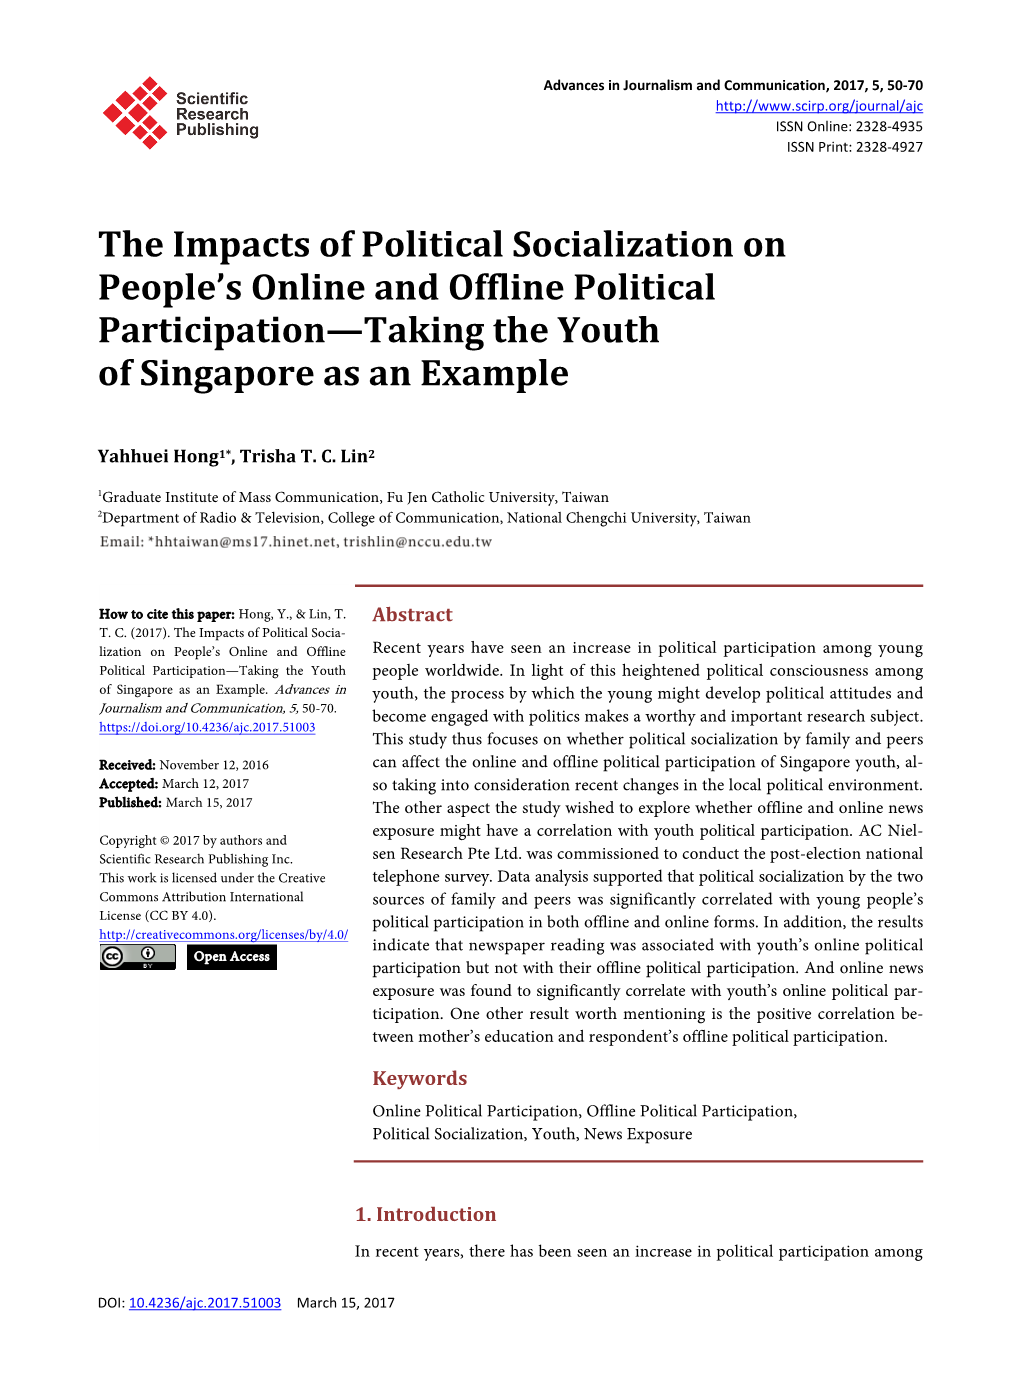 The Impacts of Political Socialization on People's Online and Offline